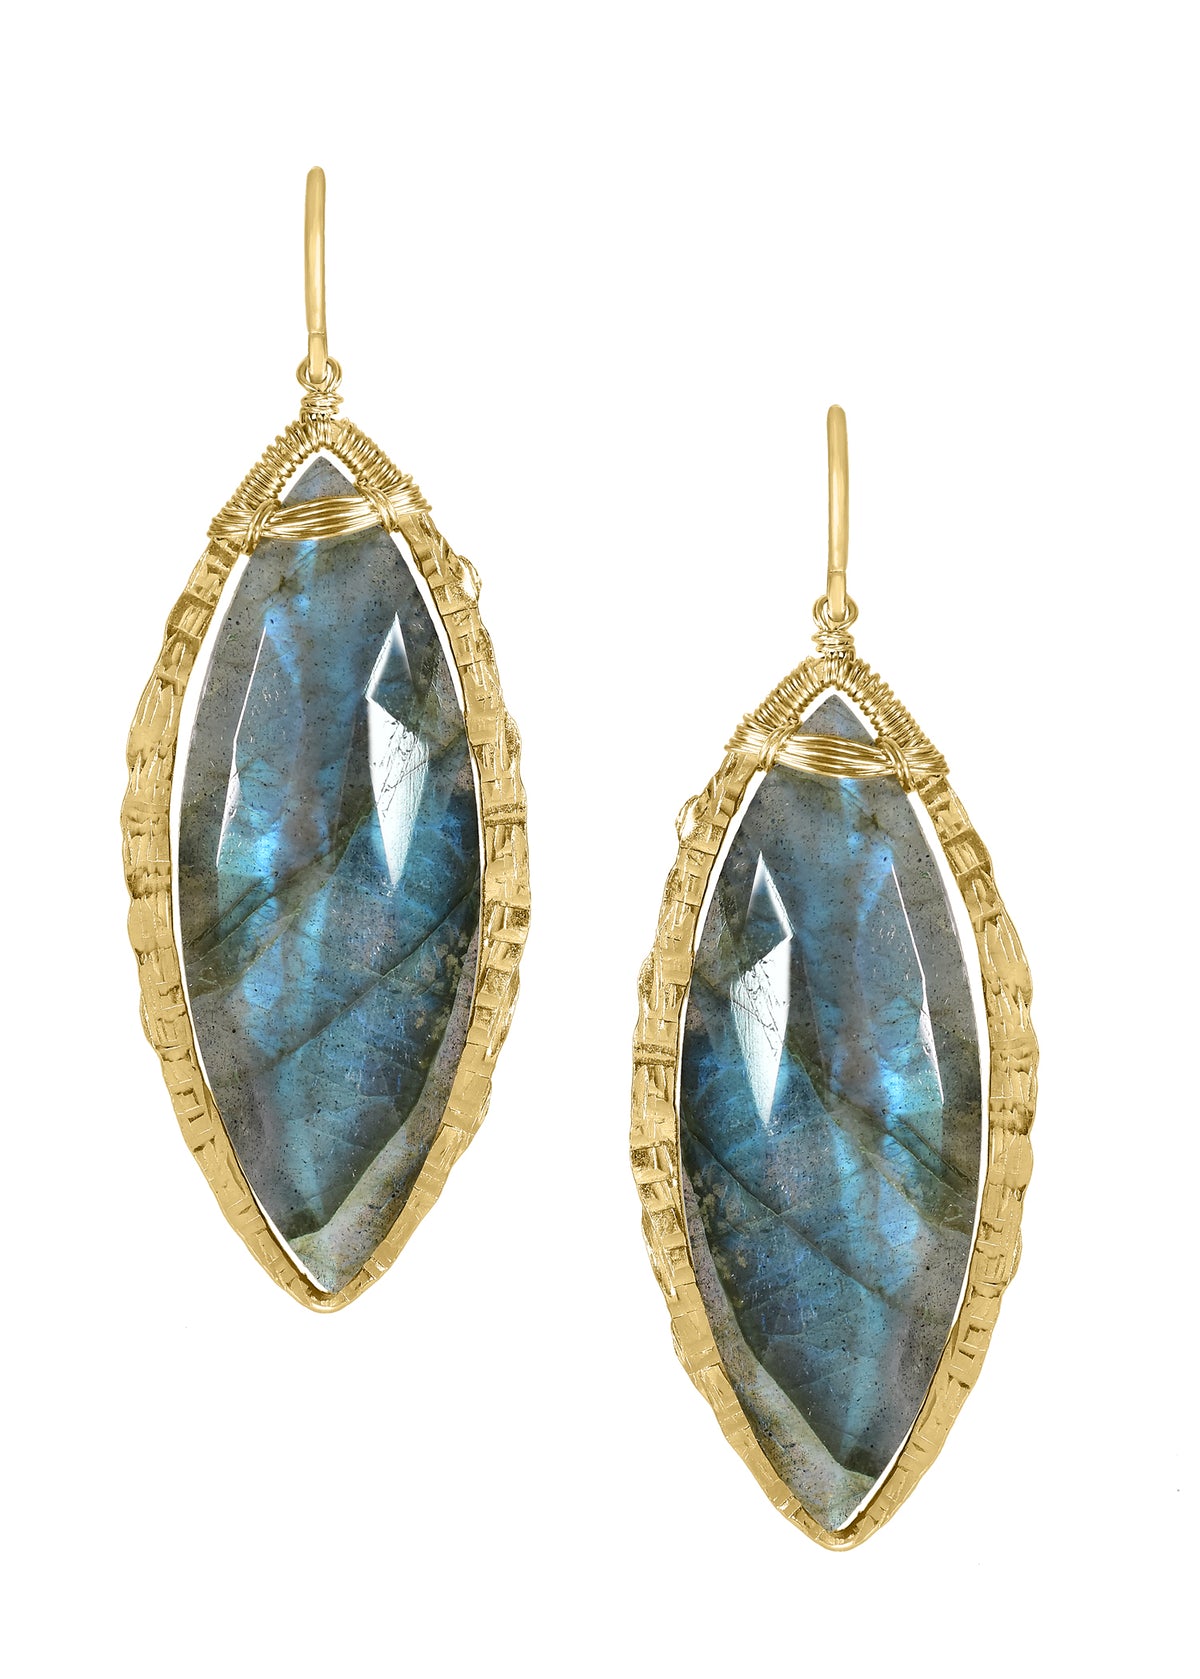 Labradorite 14k gold fill Earring measures 2&quot; in length (including the ear wires) and 5/8&quot; in width at the widest point Handmade in our Los Angeles studio